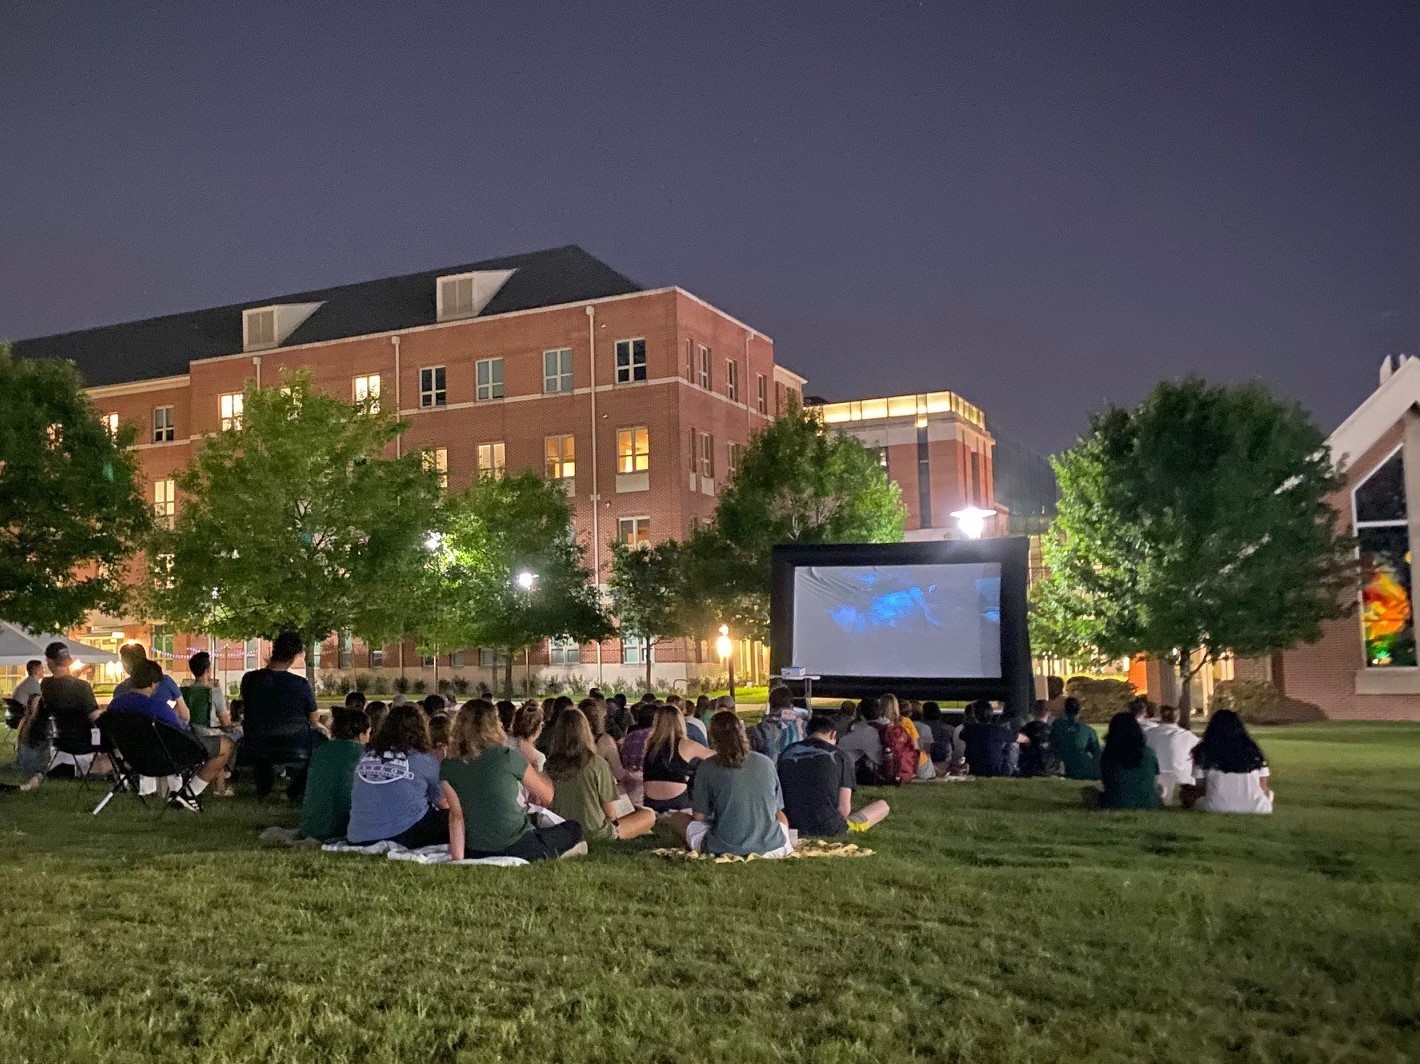 Movie on the Lawn